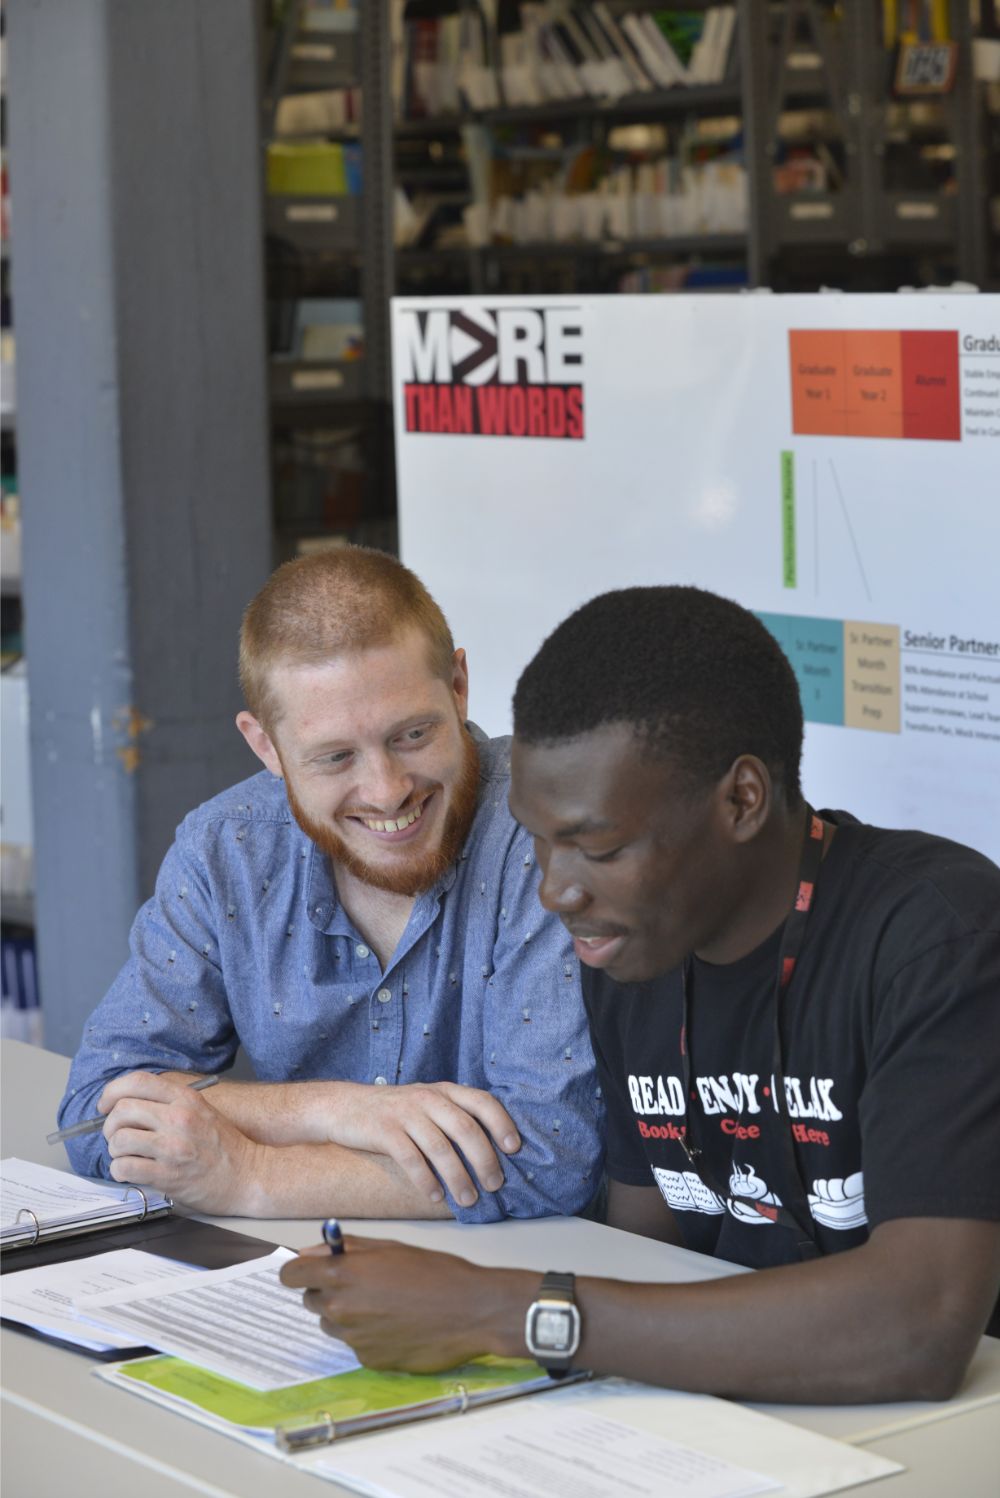 Jon Luc (right) evaluates his progress and receives feedback before and after each shift at the bookstore on East Berkeley Street. Photo courtesy of More Than Words.